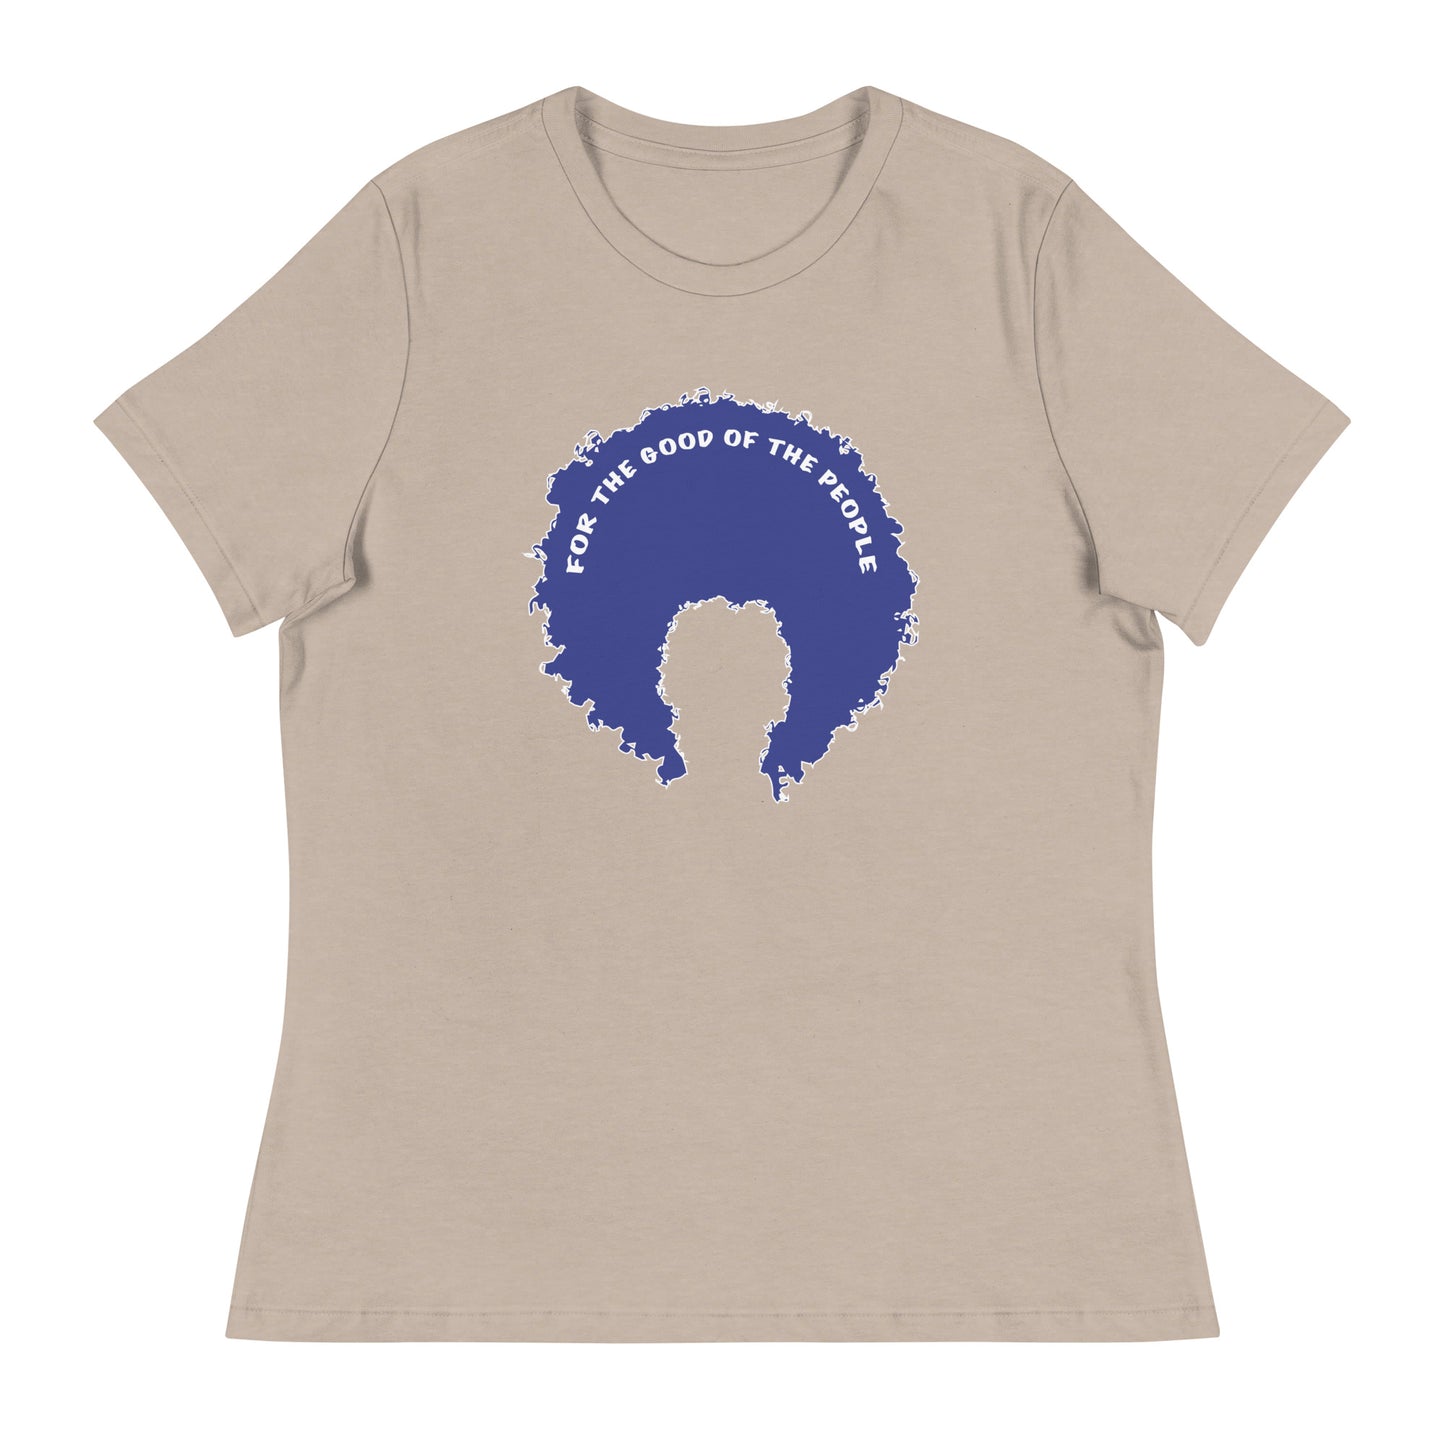 Stone women's tee with blue afro graphic trimmed in white with for the good of the people in white on the inside top of the afro.